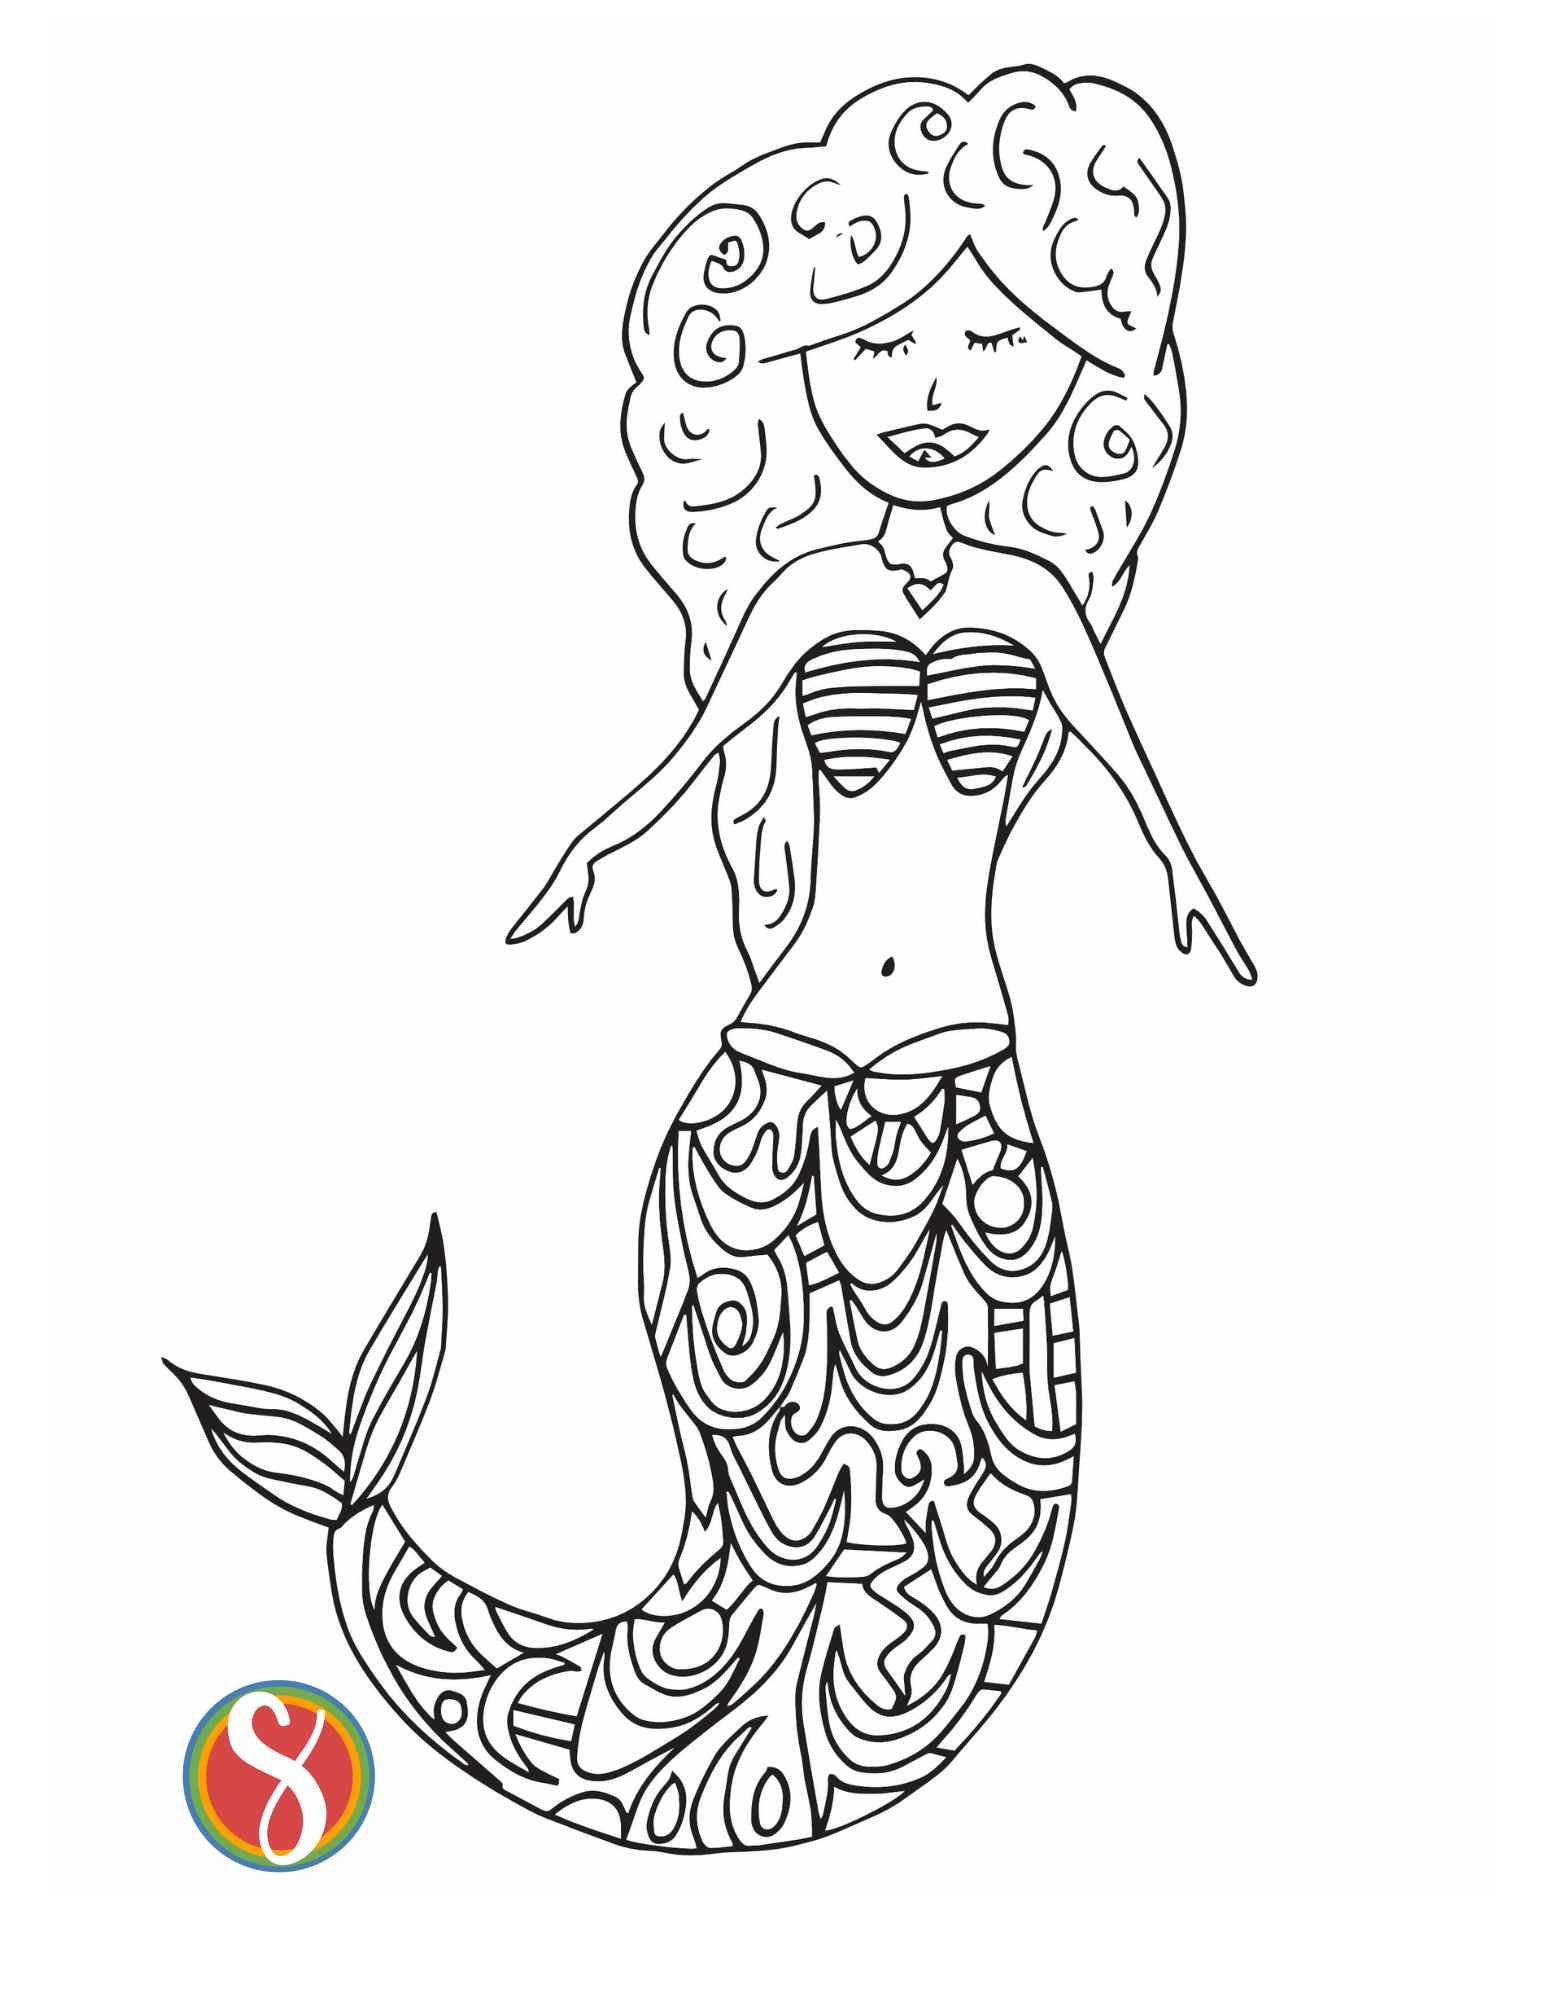 A female mermaid with curly hair, shell bra, and a tail full of colorable doodles